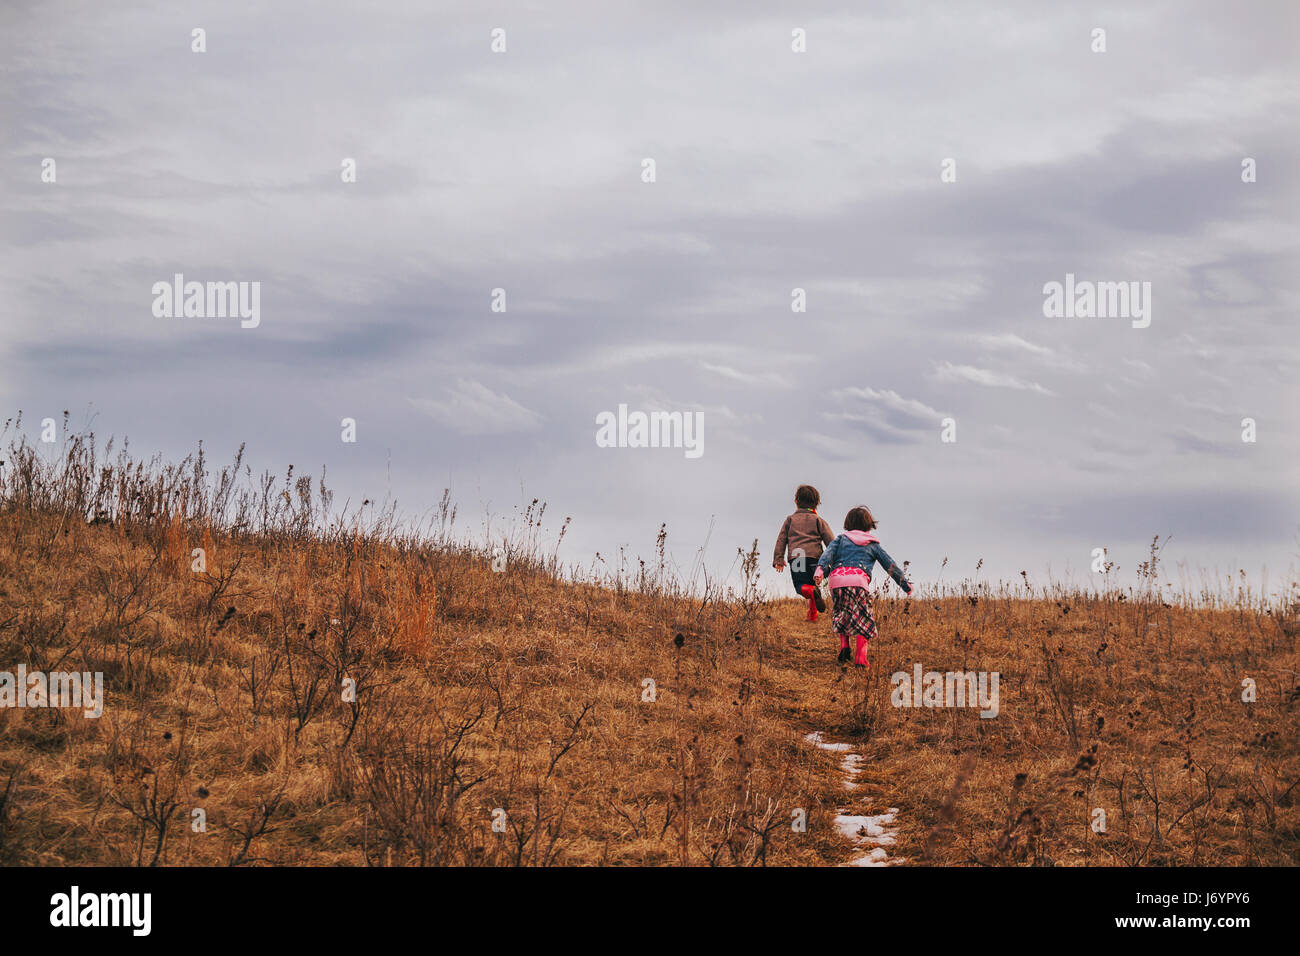 Two children running up a hill Stock Photo